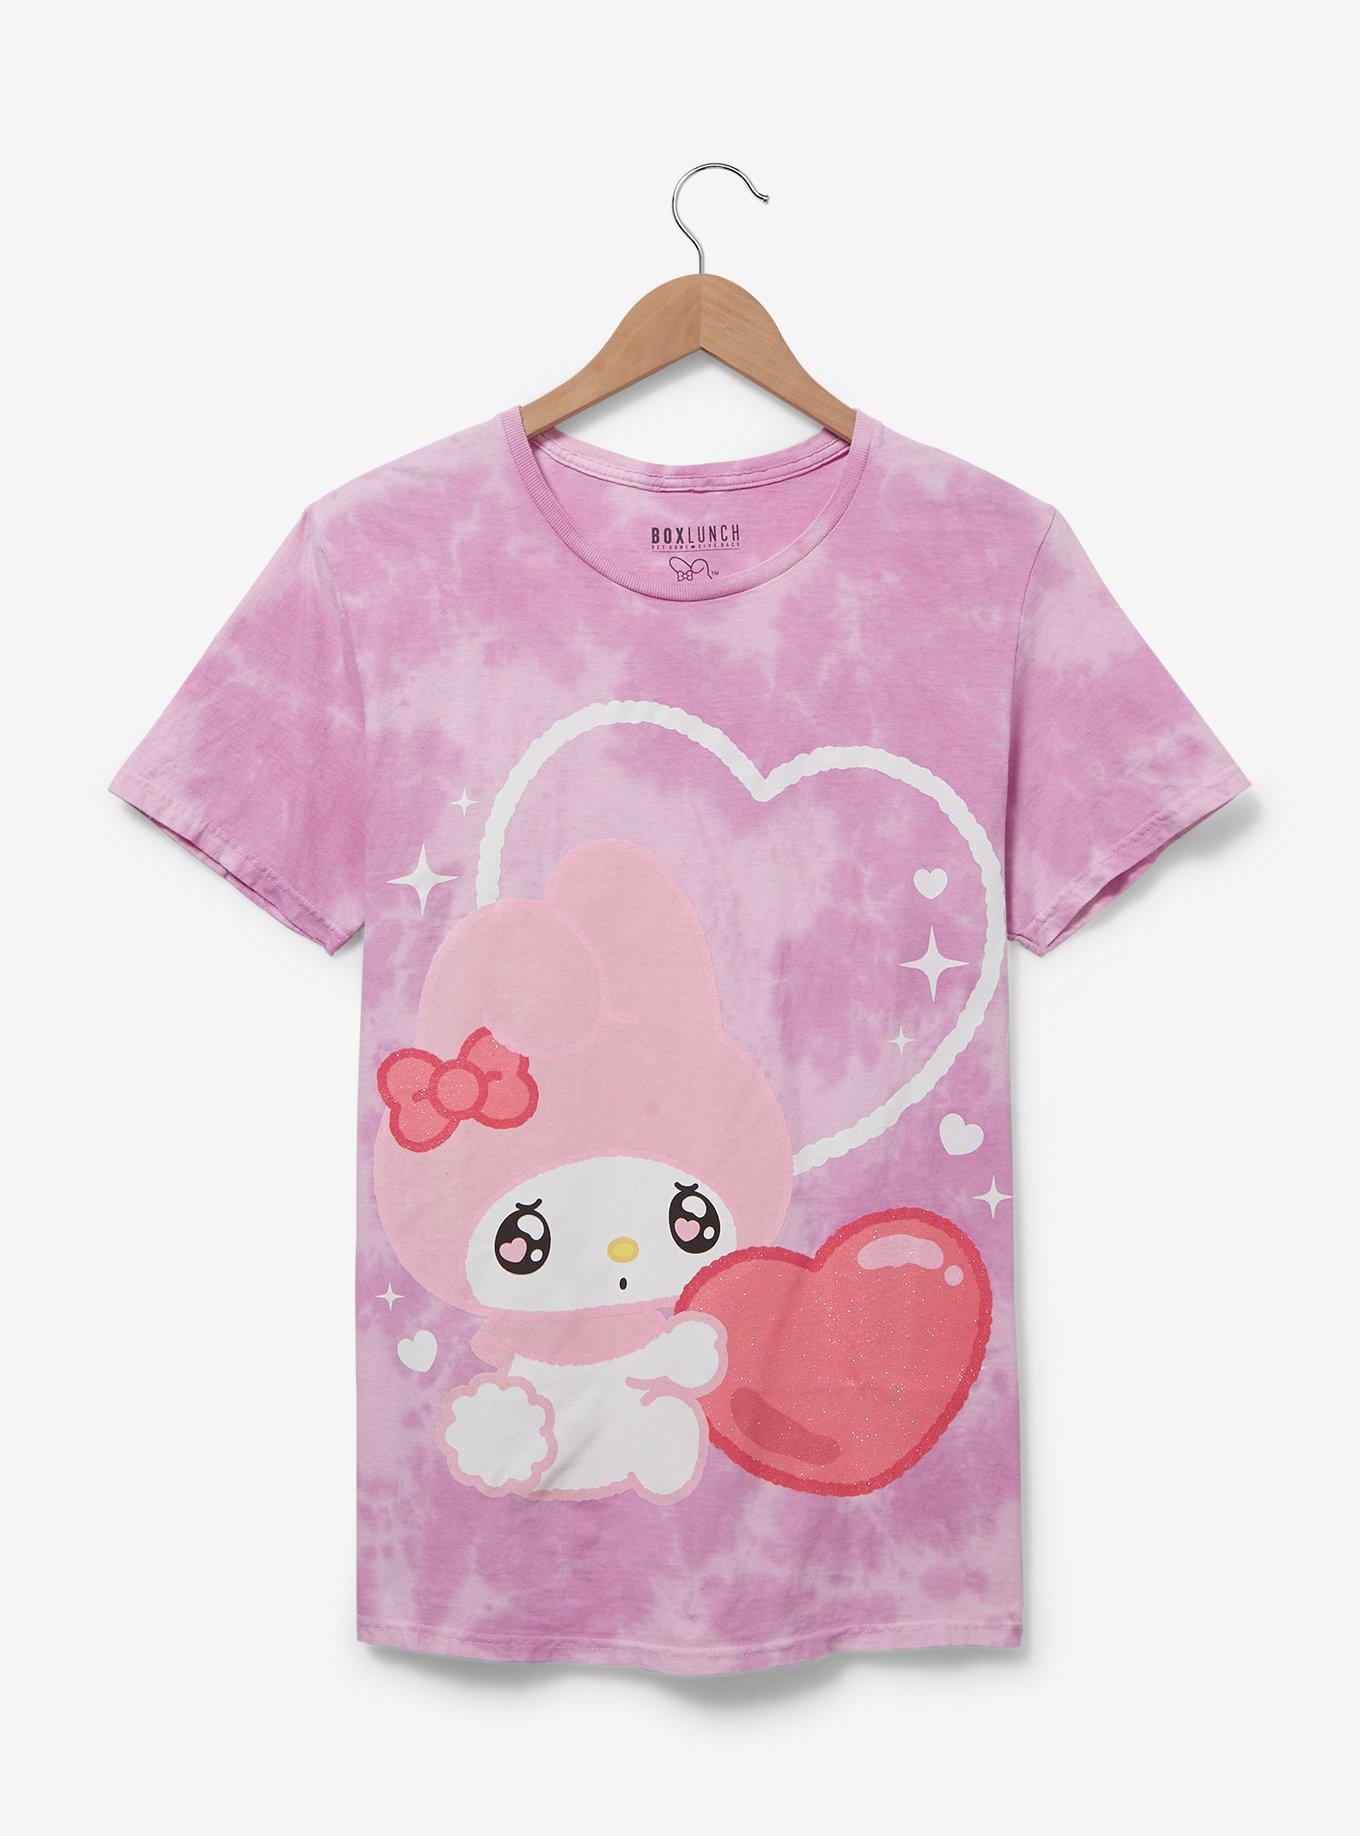 Sanrio Emo-Kyun My Melody Glitter Heart Women's T-Shirt - BoxLunch Exclusive, LIGHT PINK, hi-res